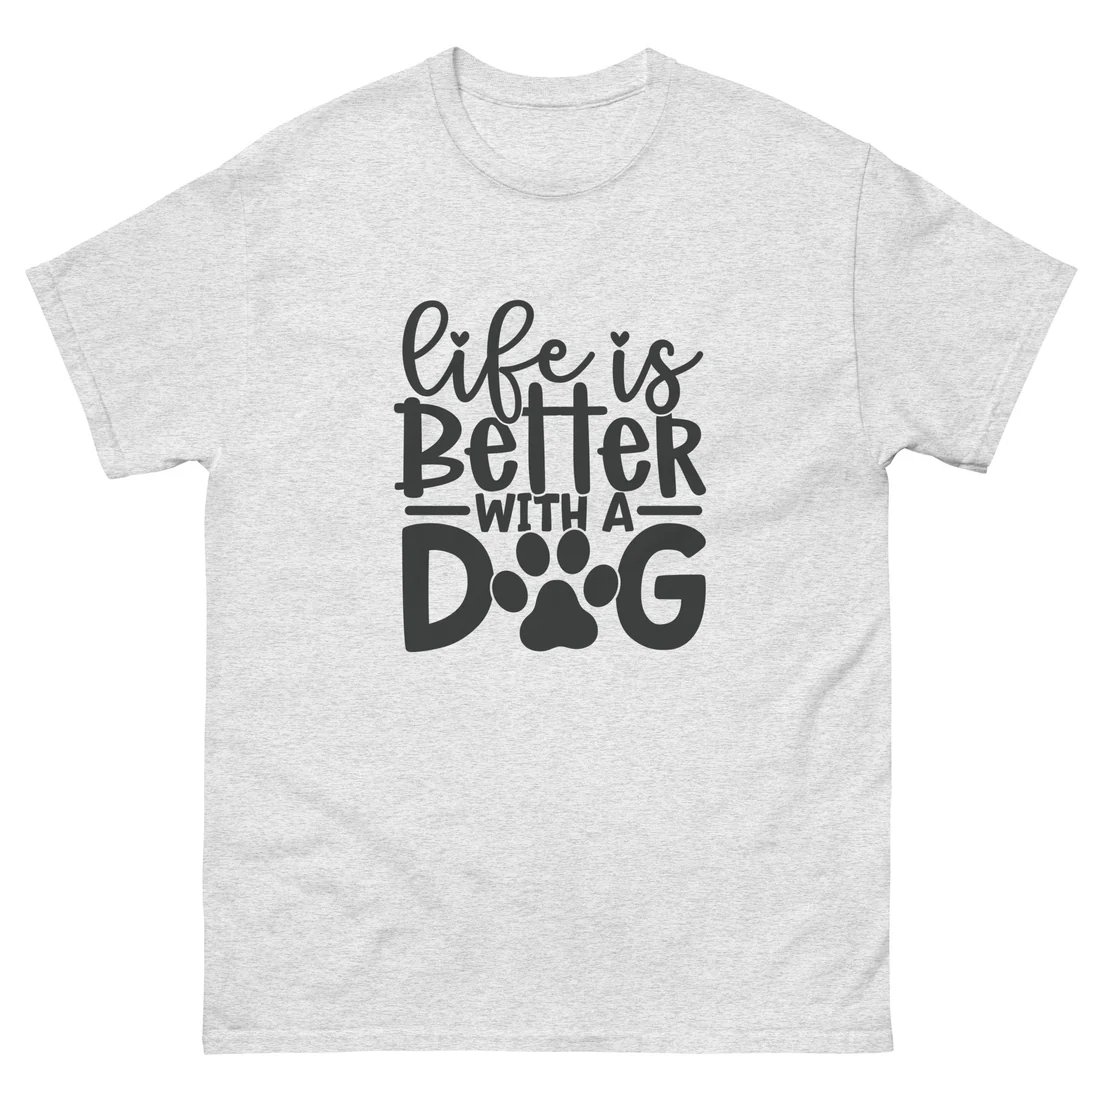 LIFE IS BETTER WITH A DOG simpleeapparelstore.com/collections/do… #dogs